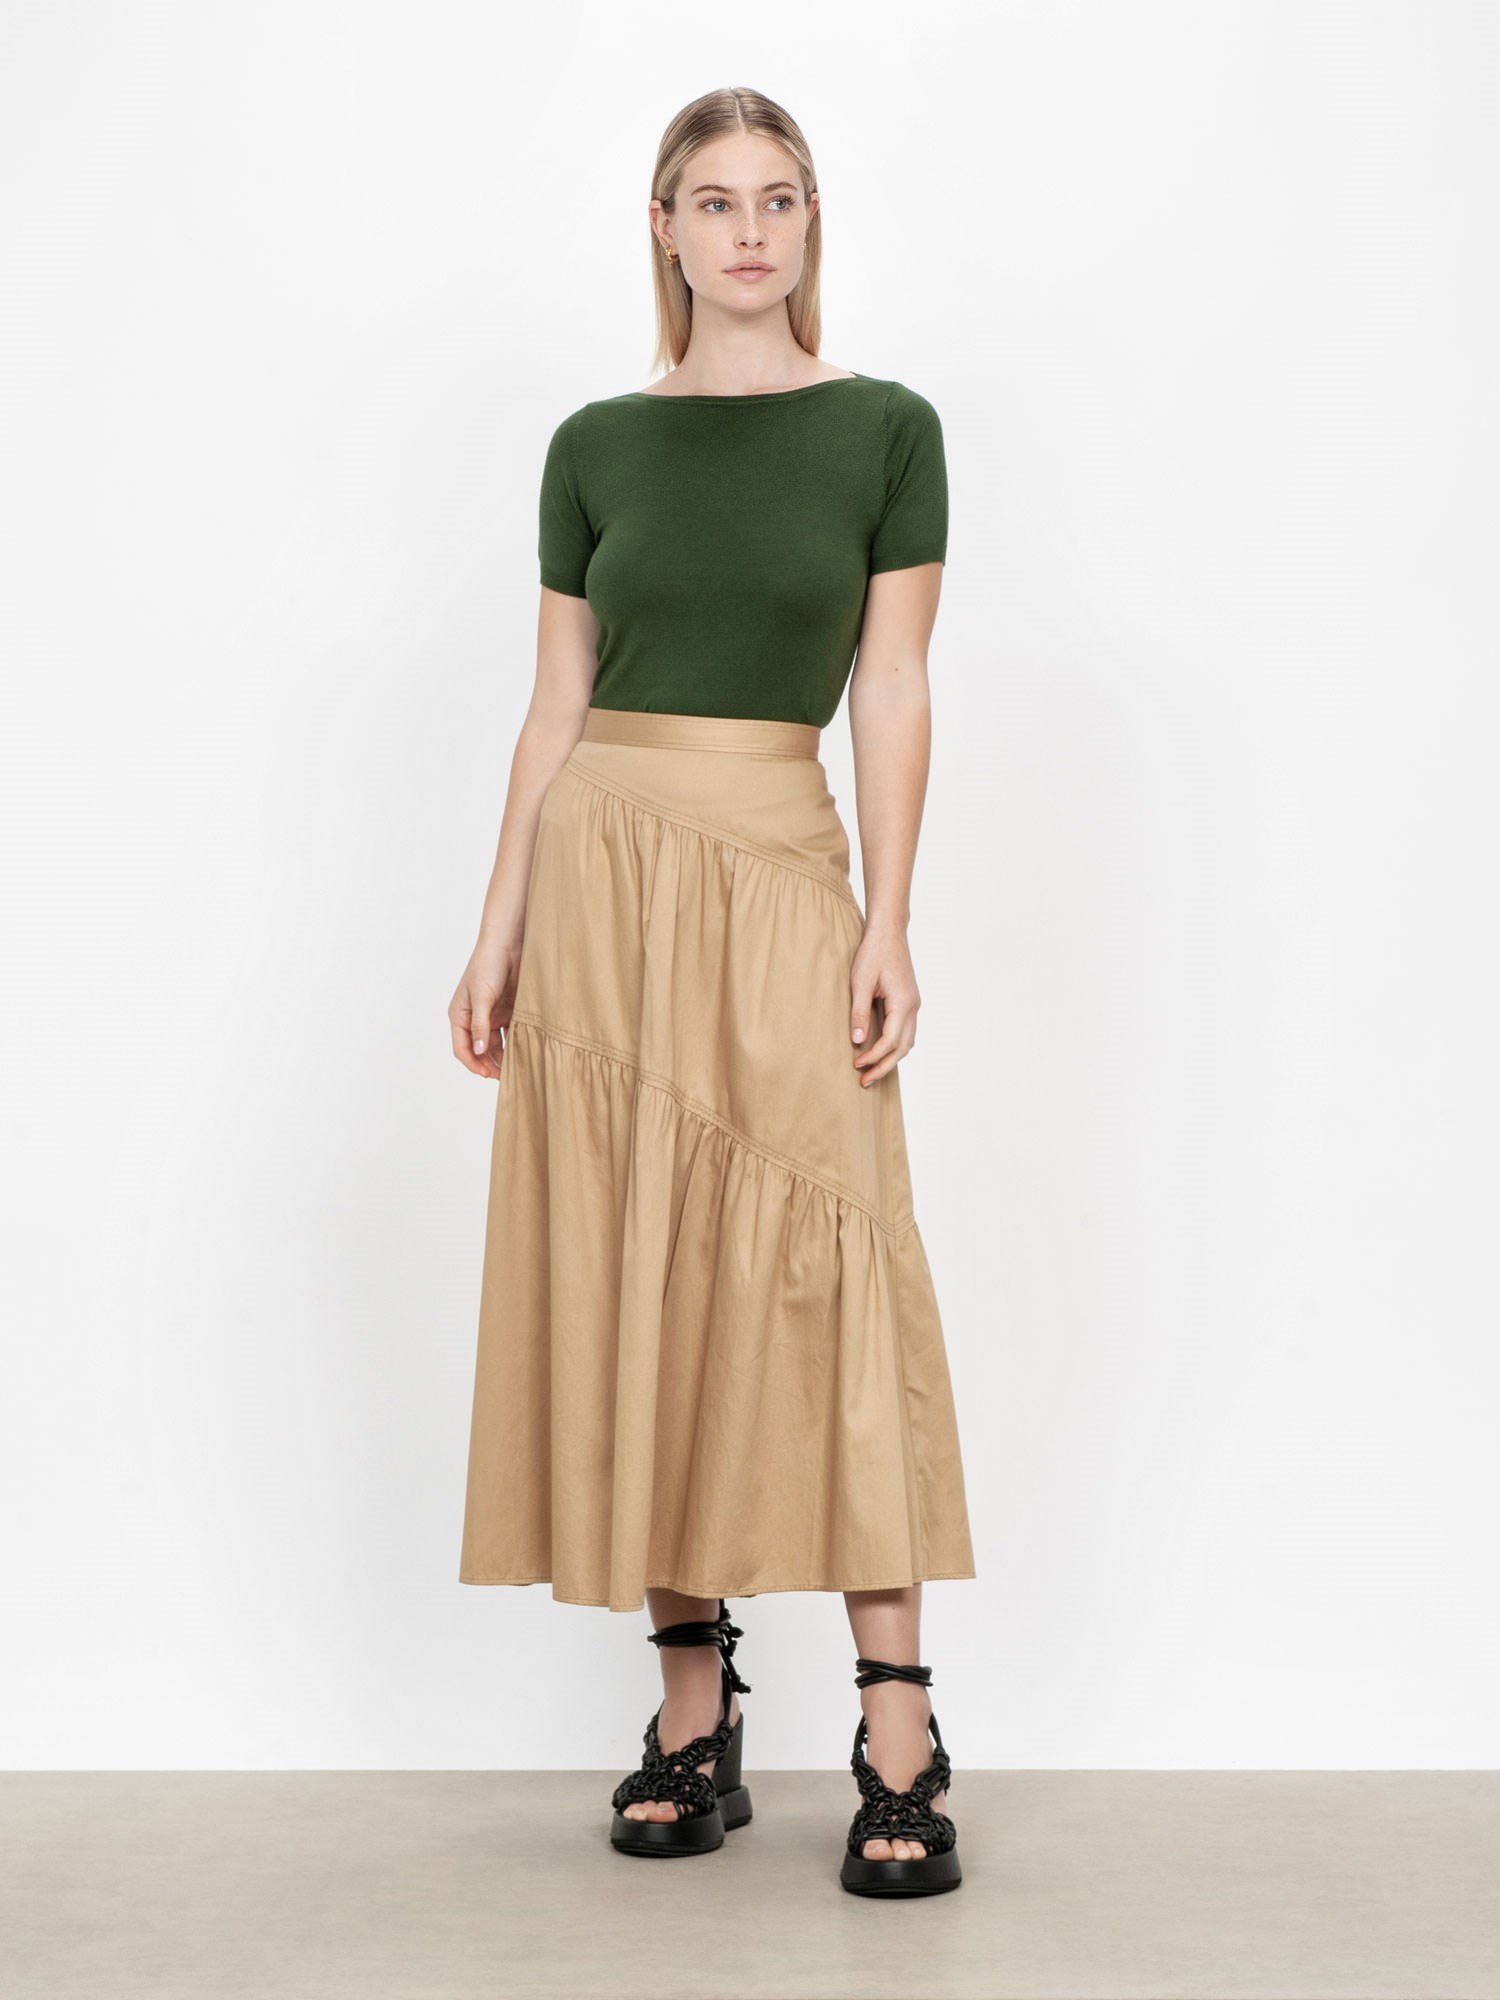 Polished Cotton Tiered Maxi Skirt | Buy Skirts Online - Veronika Maine